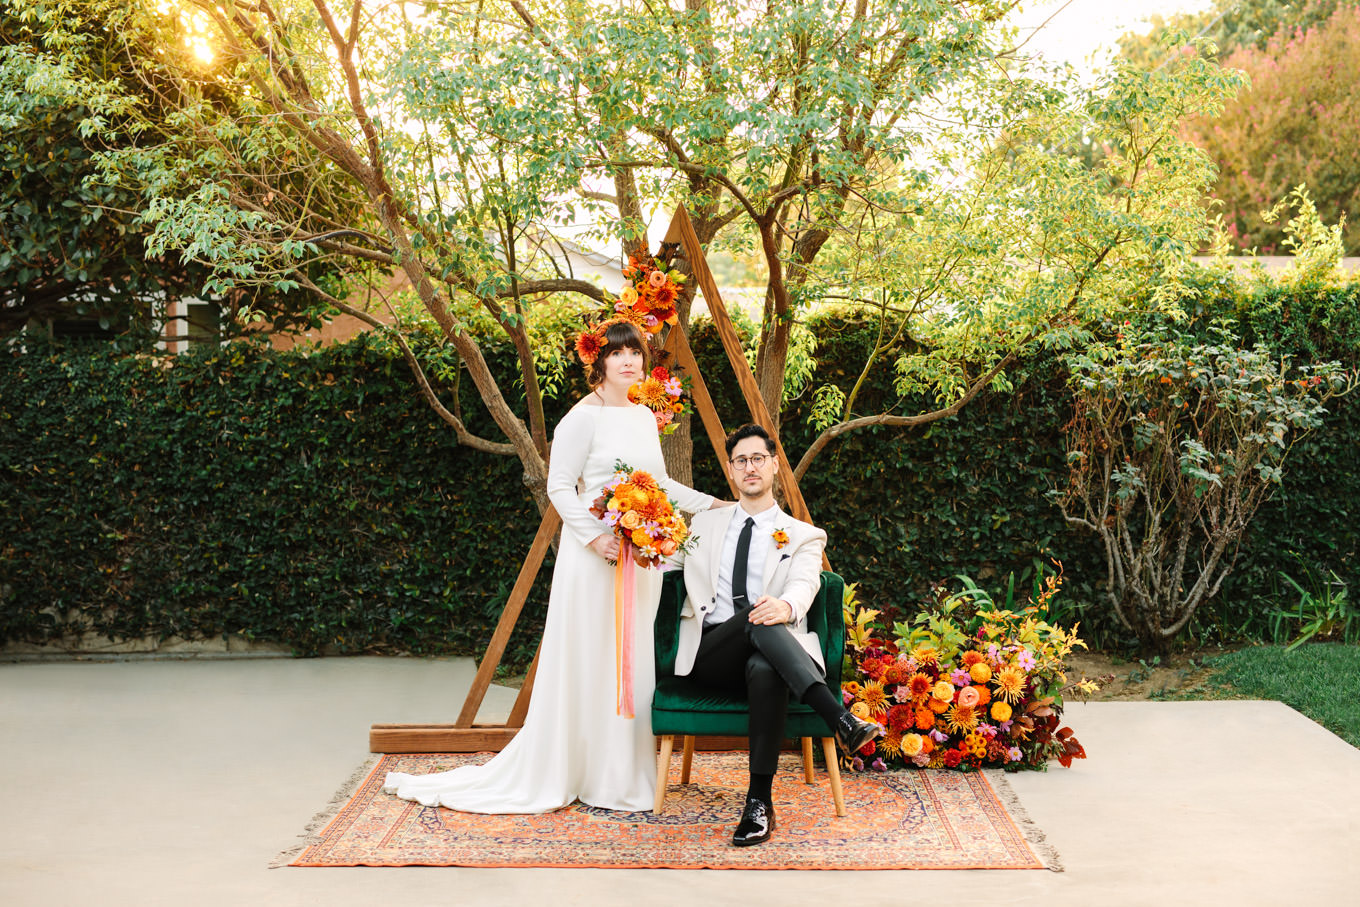 Groom seated with bride standing | Vibrant backyard micro wedding featured on Green Wedding Shoes | Colorful LA wedding photography | #losangeleswedding #backyardwedding #microwedding #laweddingphotographer Source: Mary Costa Photography | Los Angeles